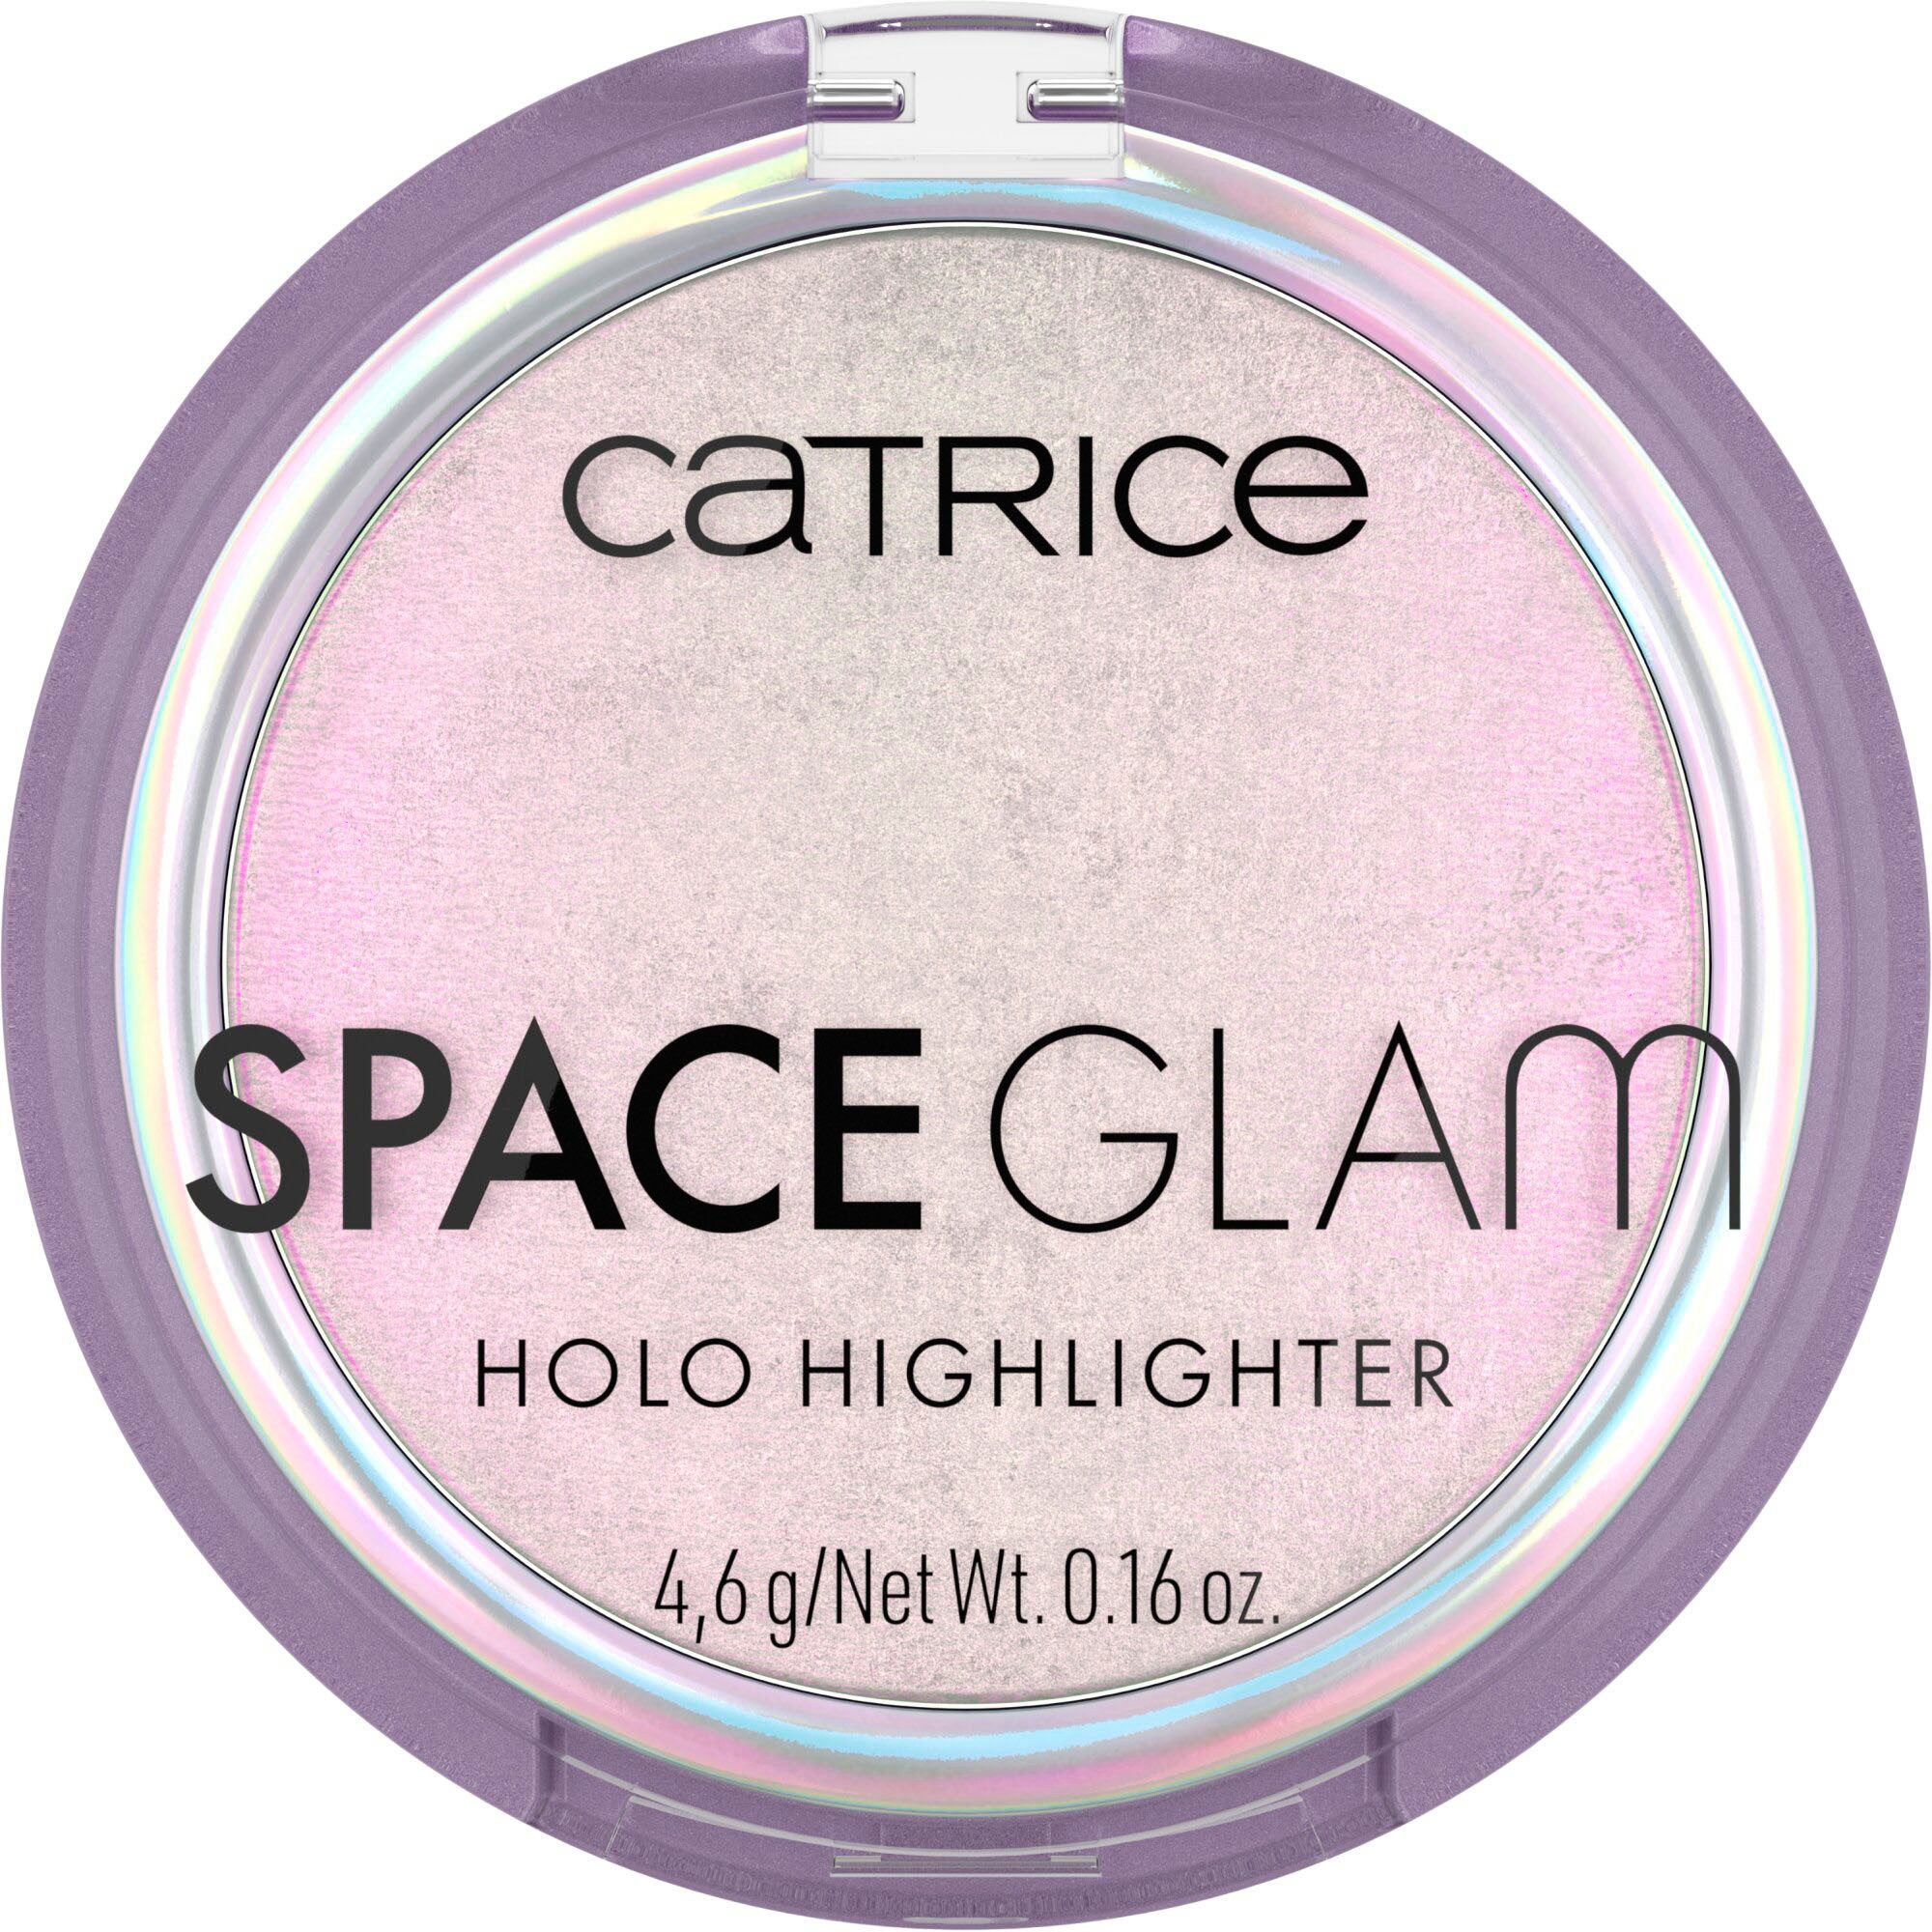 Catrice Highlighter Space Glam Holo Highlighter